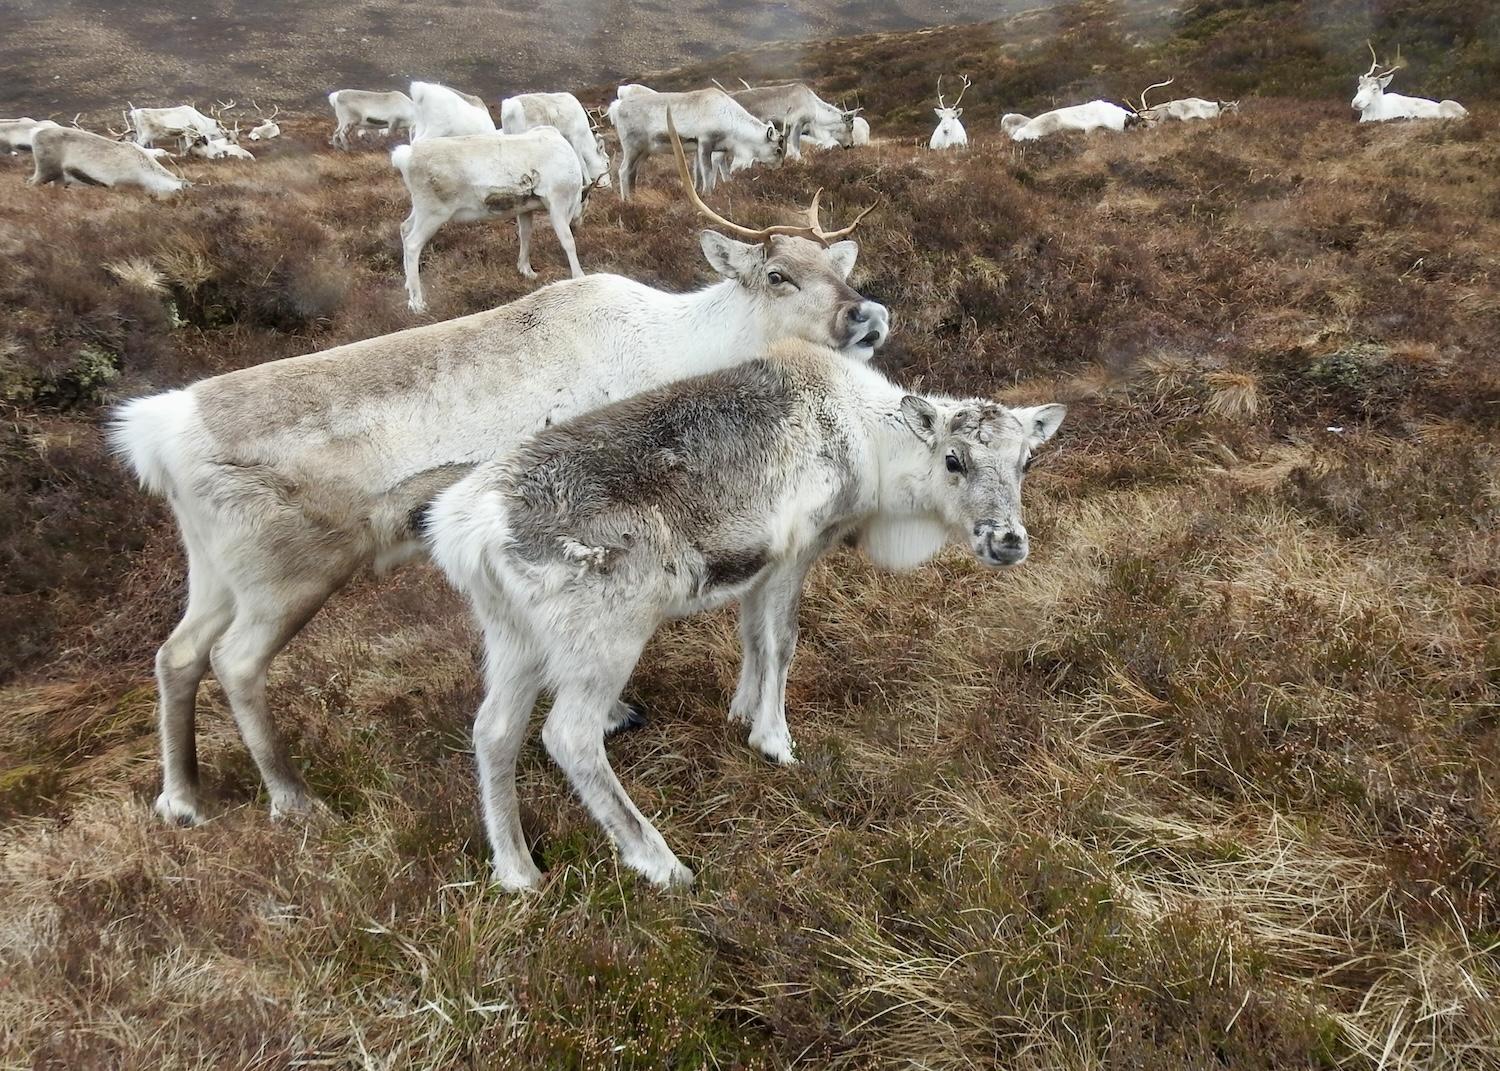 In Scotland's Cairngorms National Park, Britain's only free-roaming reindeer herd includes mom Suebi and son Elbe.